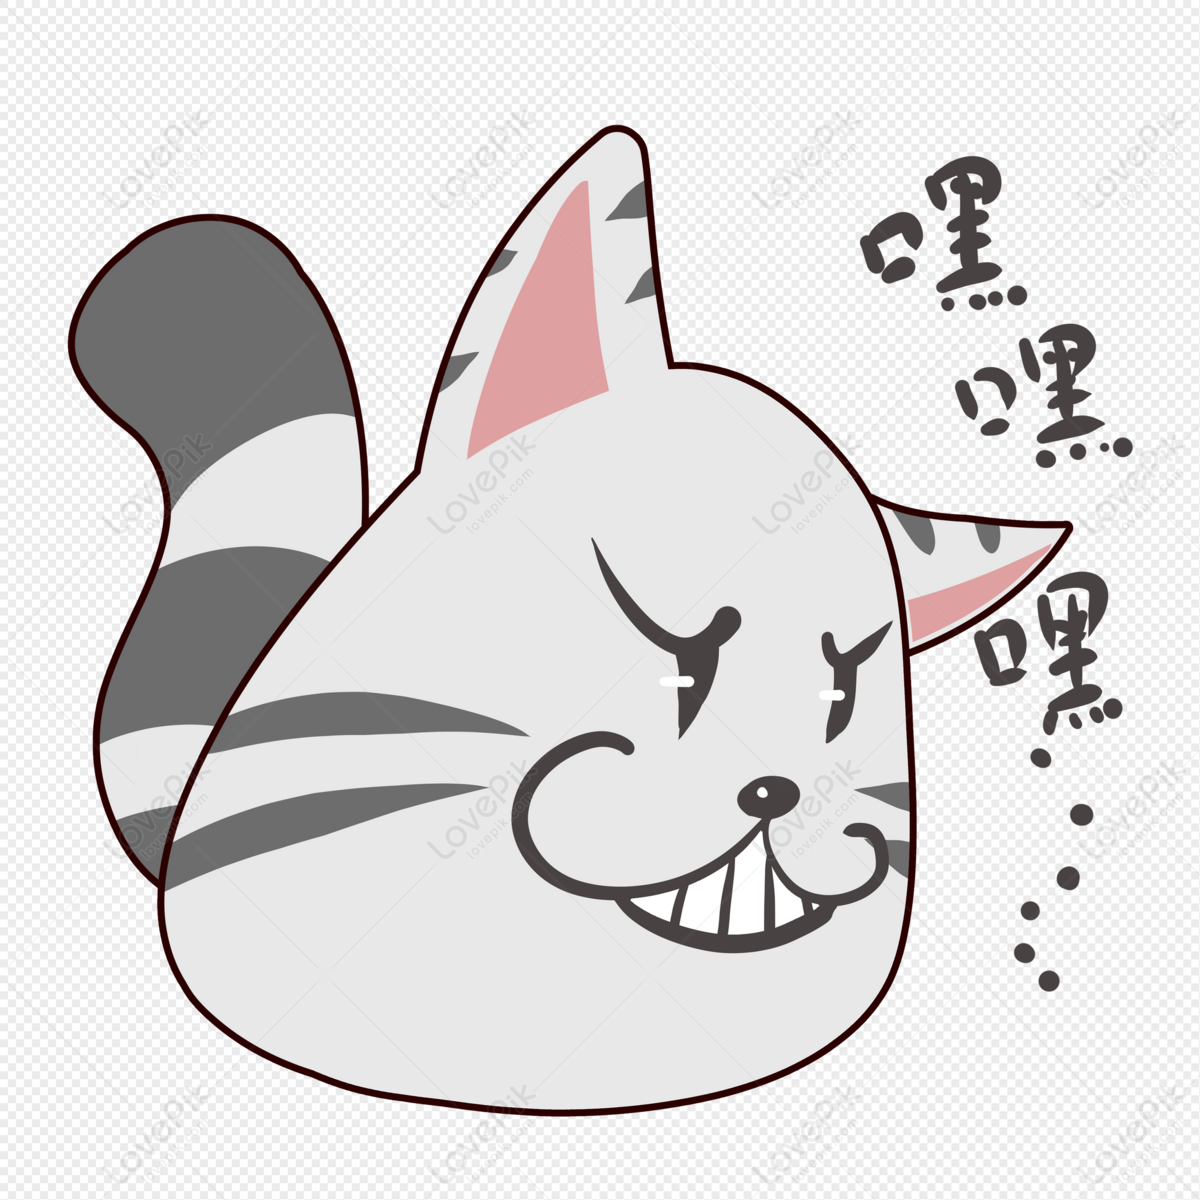 Rolling Cat Expression Kit PNG Image And Clipart Image For Free ...